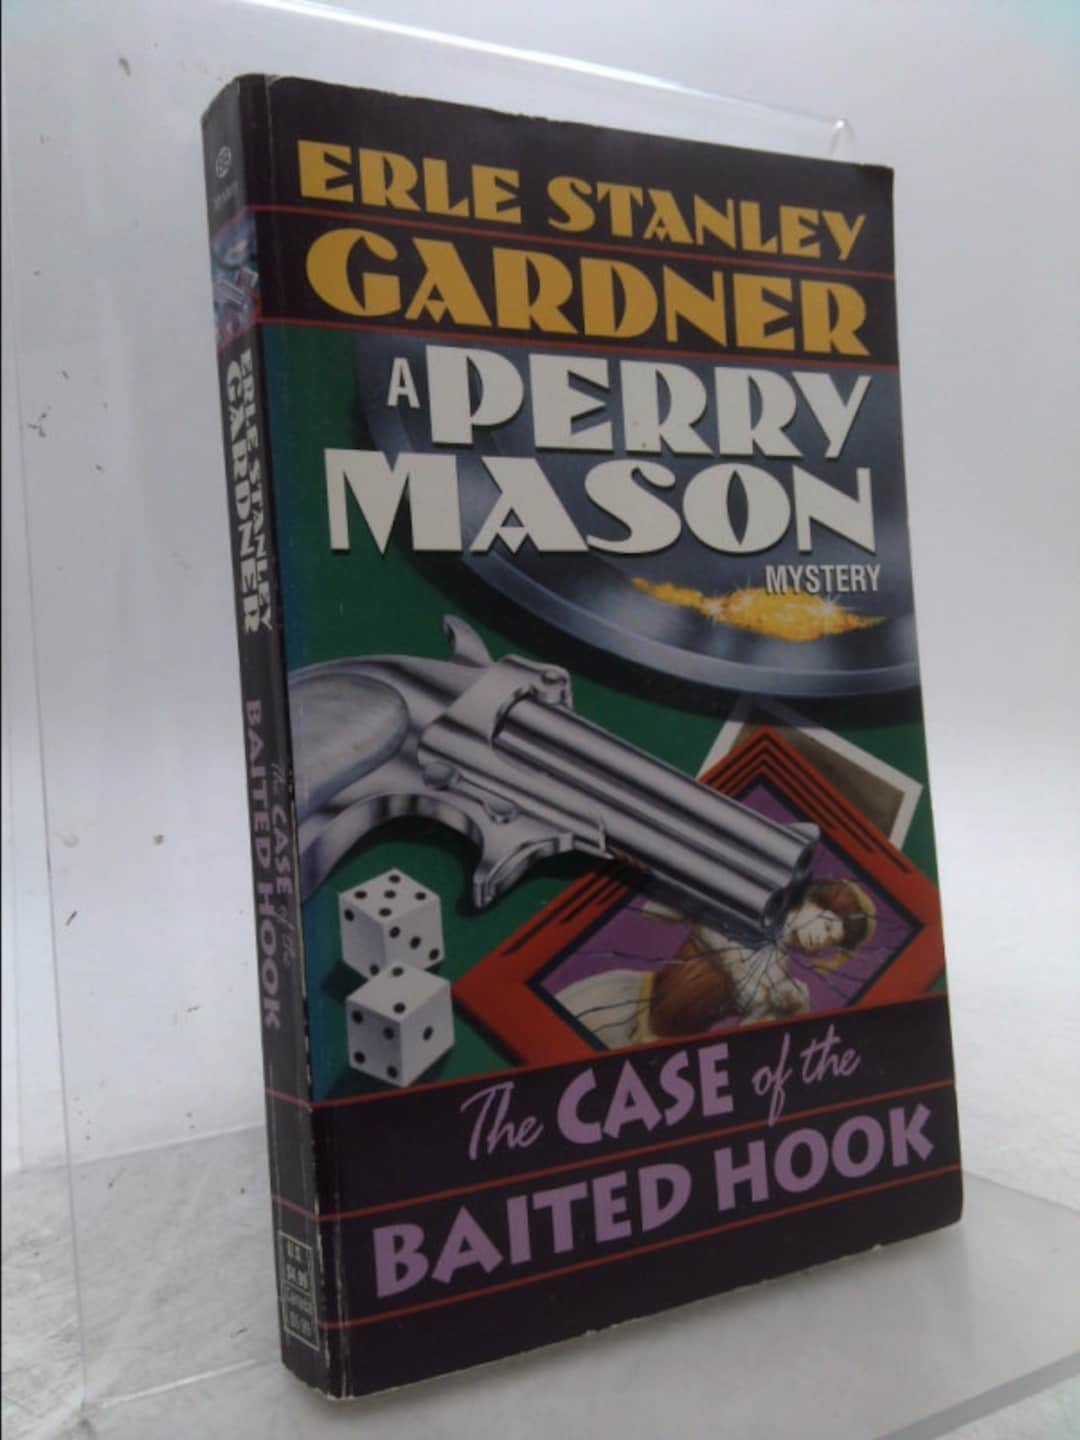 The Case of the Baited Hook by Erle Stanley Gardner 